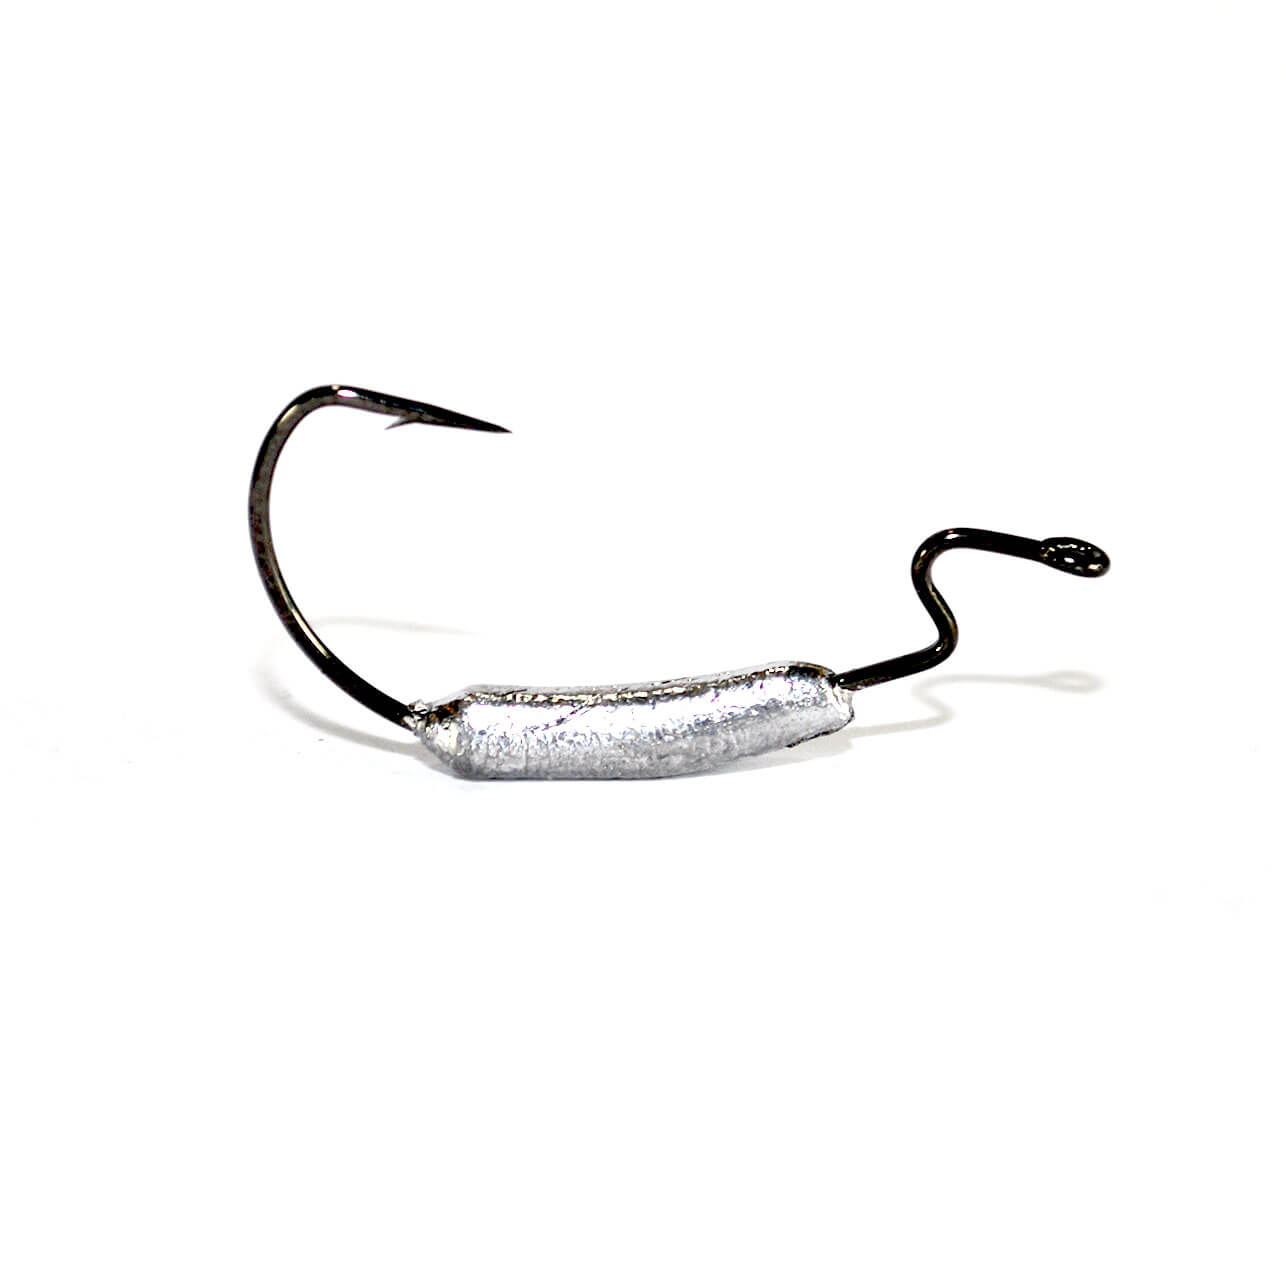 https://lurefactors.co.uk/images/products/20_Weighted_mustad_ultra_point_ewg_hook_686.jpg